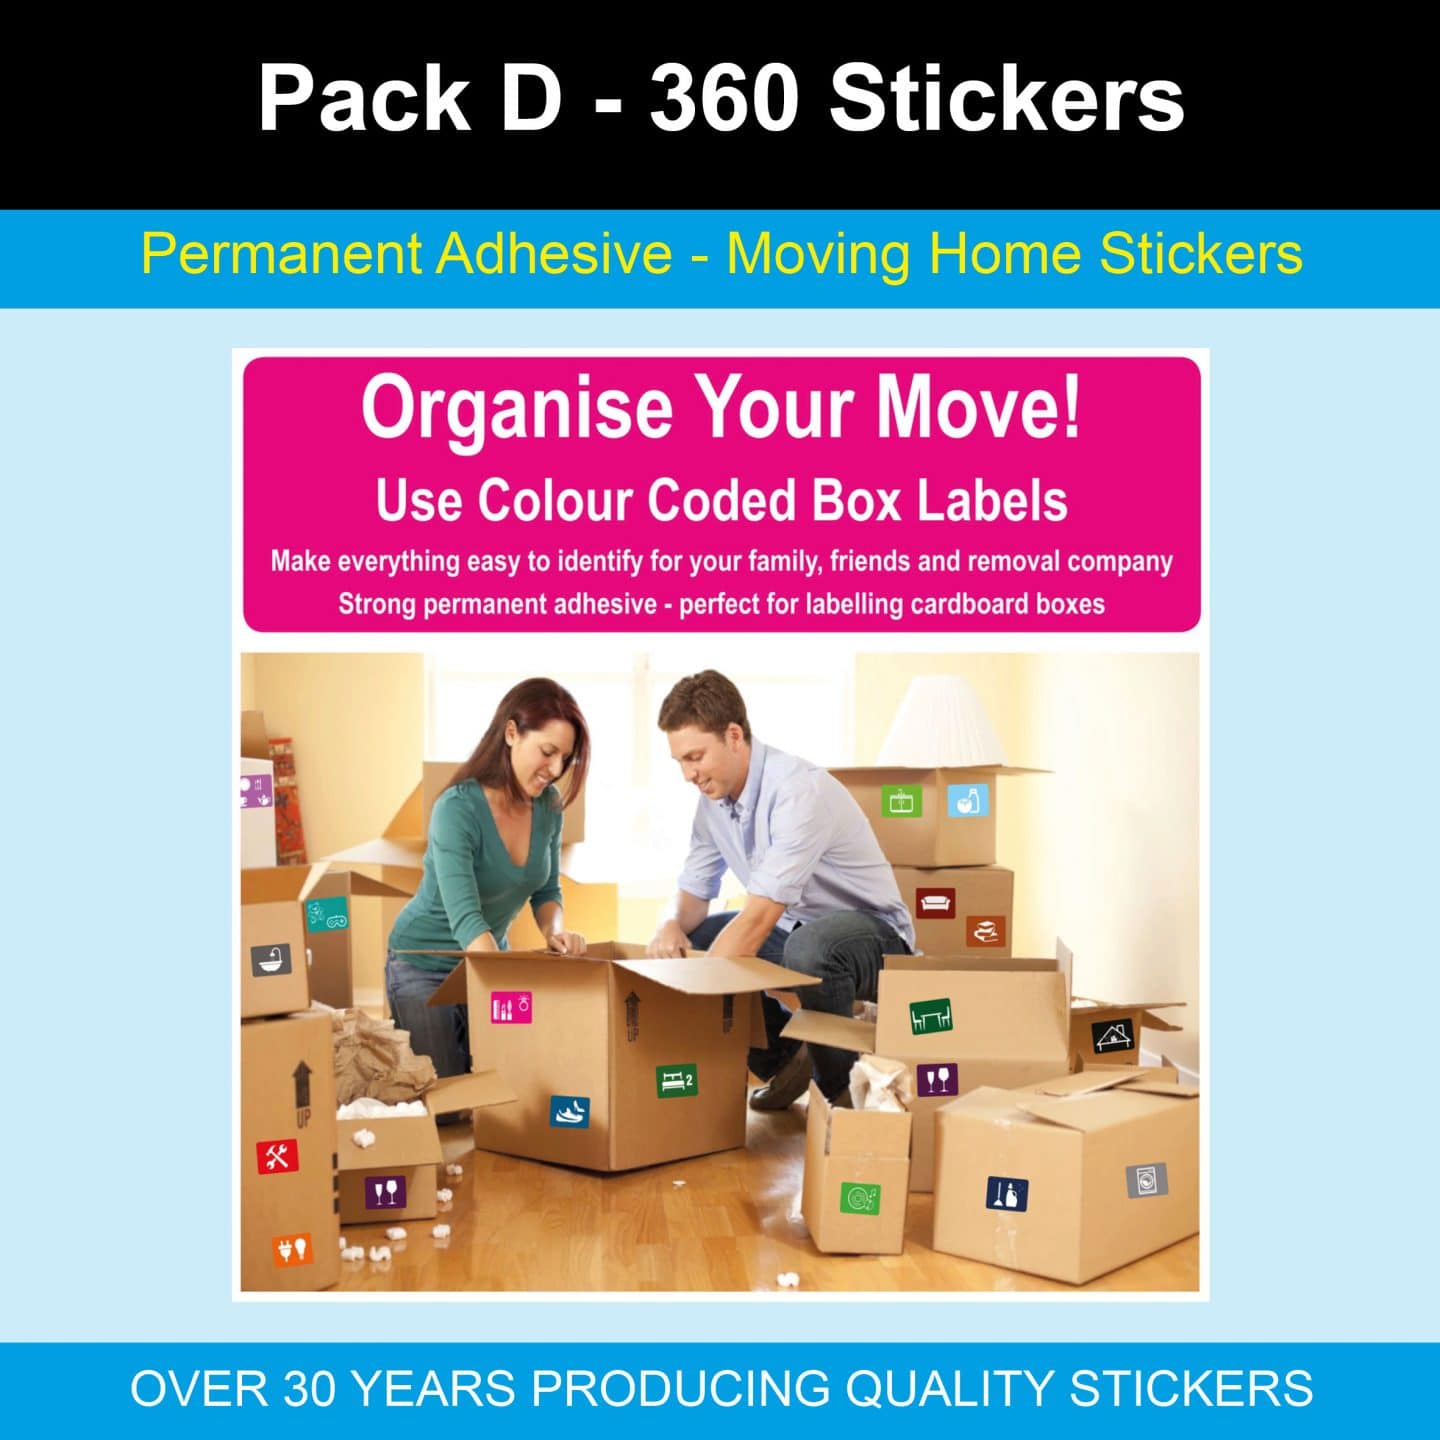 Organise Your Move Home Moving Colour Coded Cardboard Box Labels Stickers 